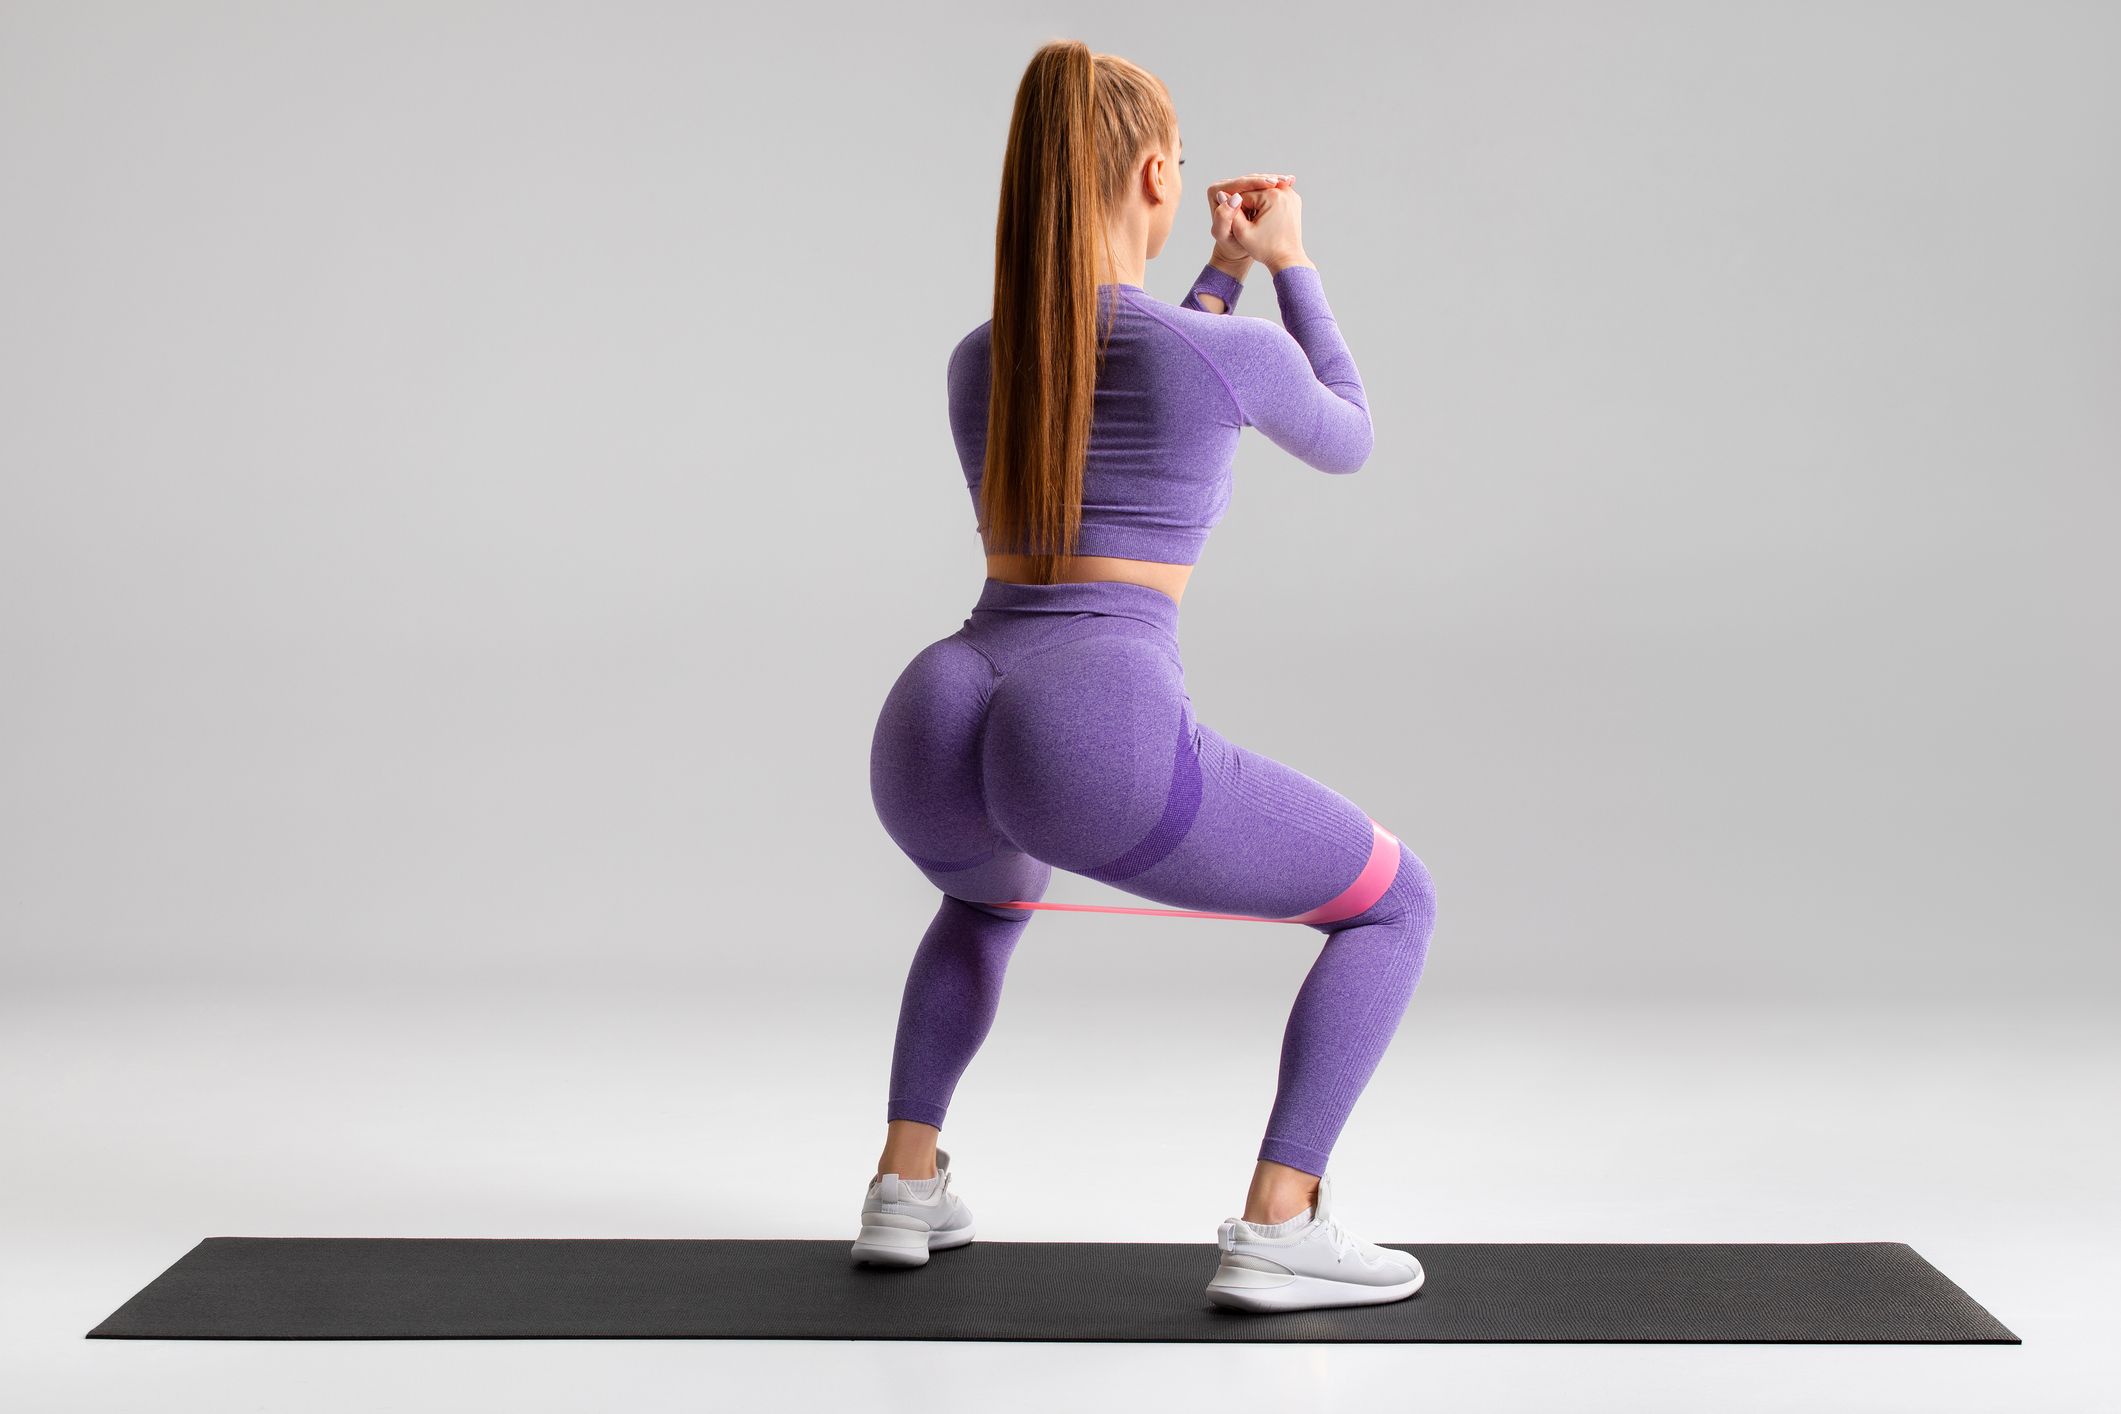 Round Butt Workout 2021 — 6 Exercises for a Rounder Butt